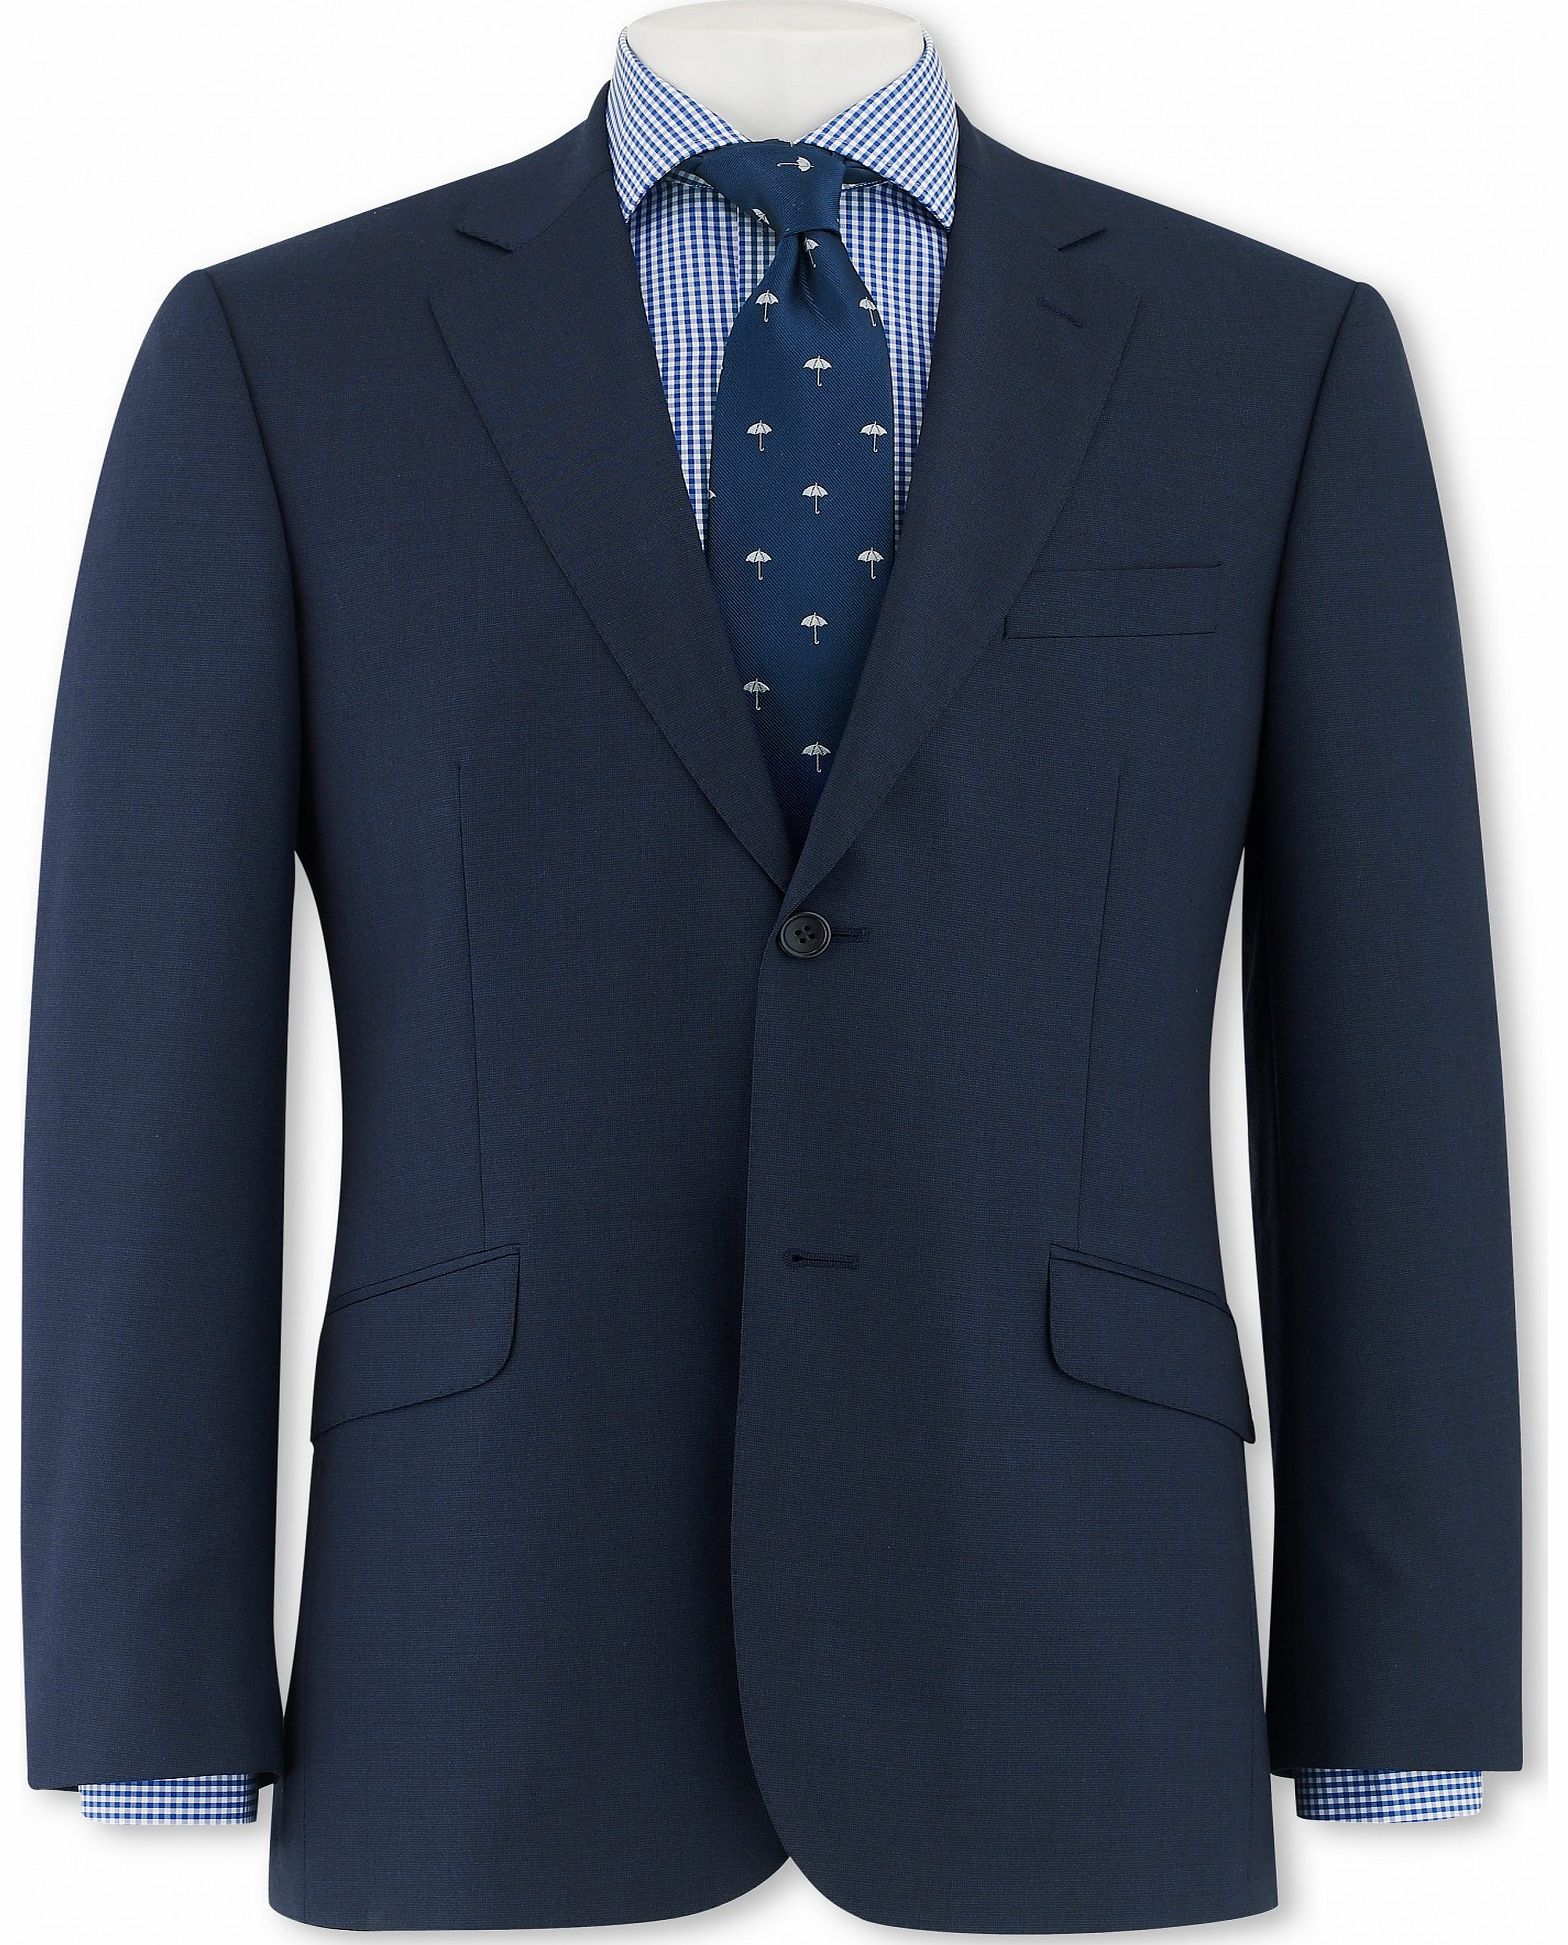 Navy Microdot Suit Jacket 46`` Long